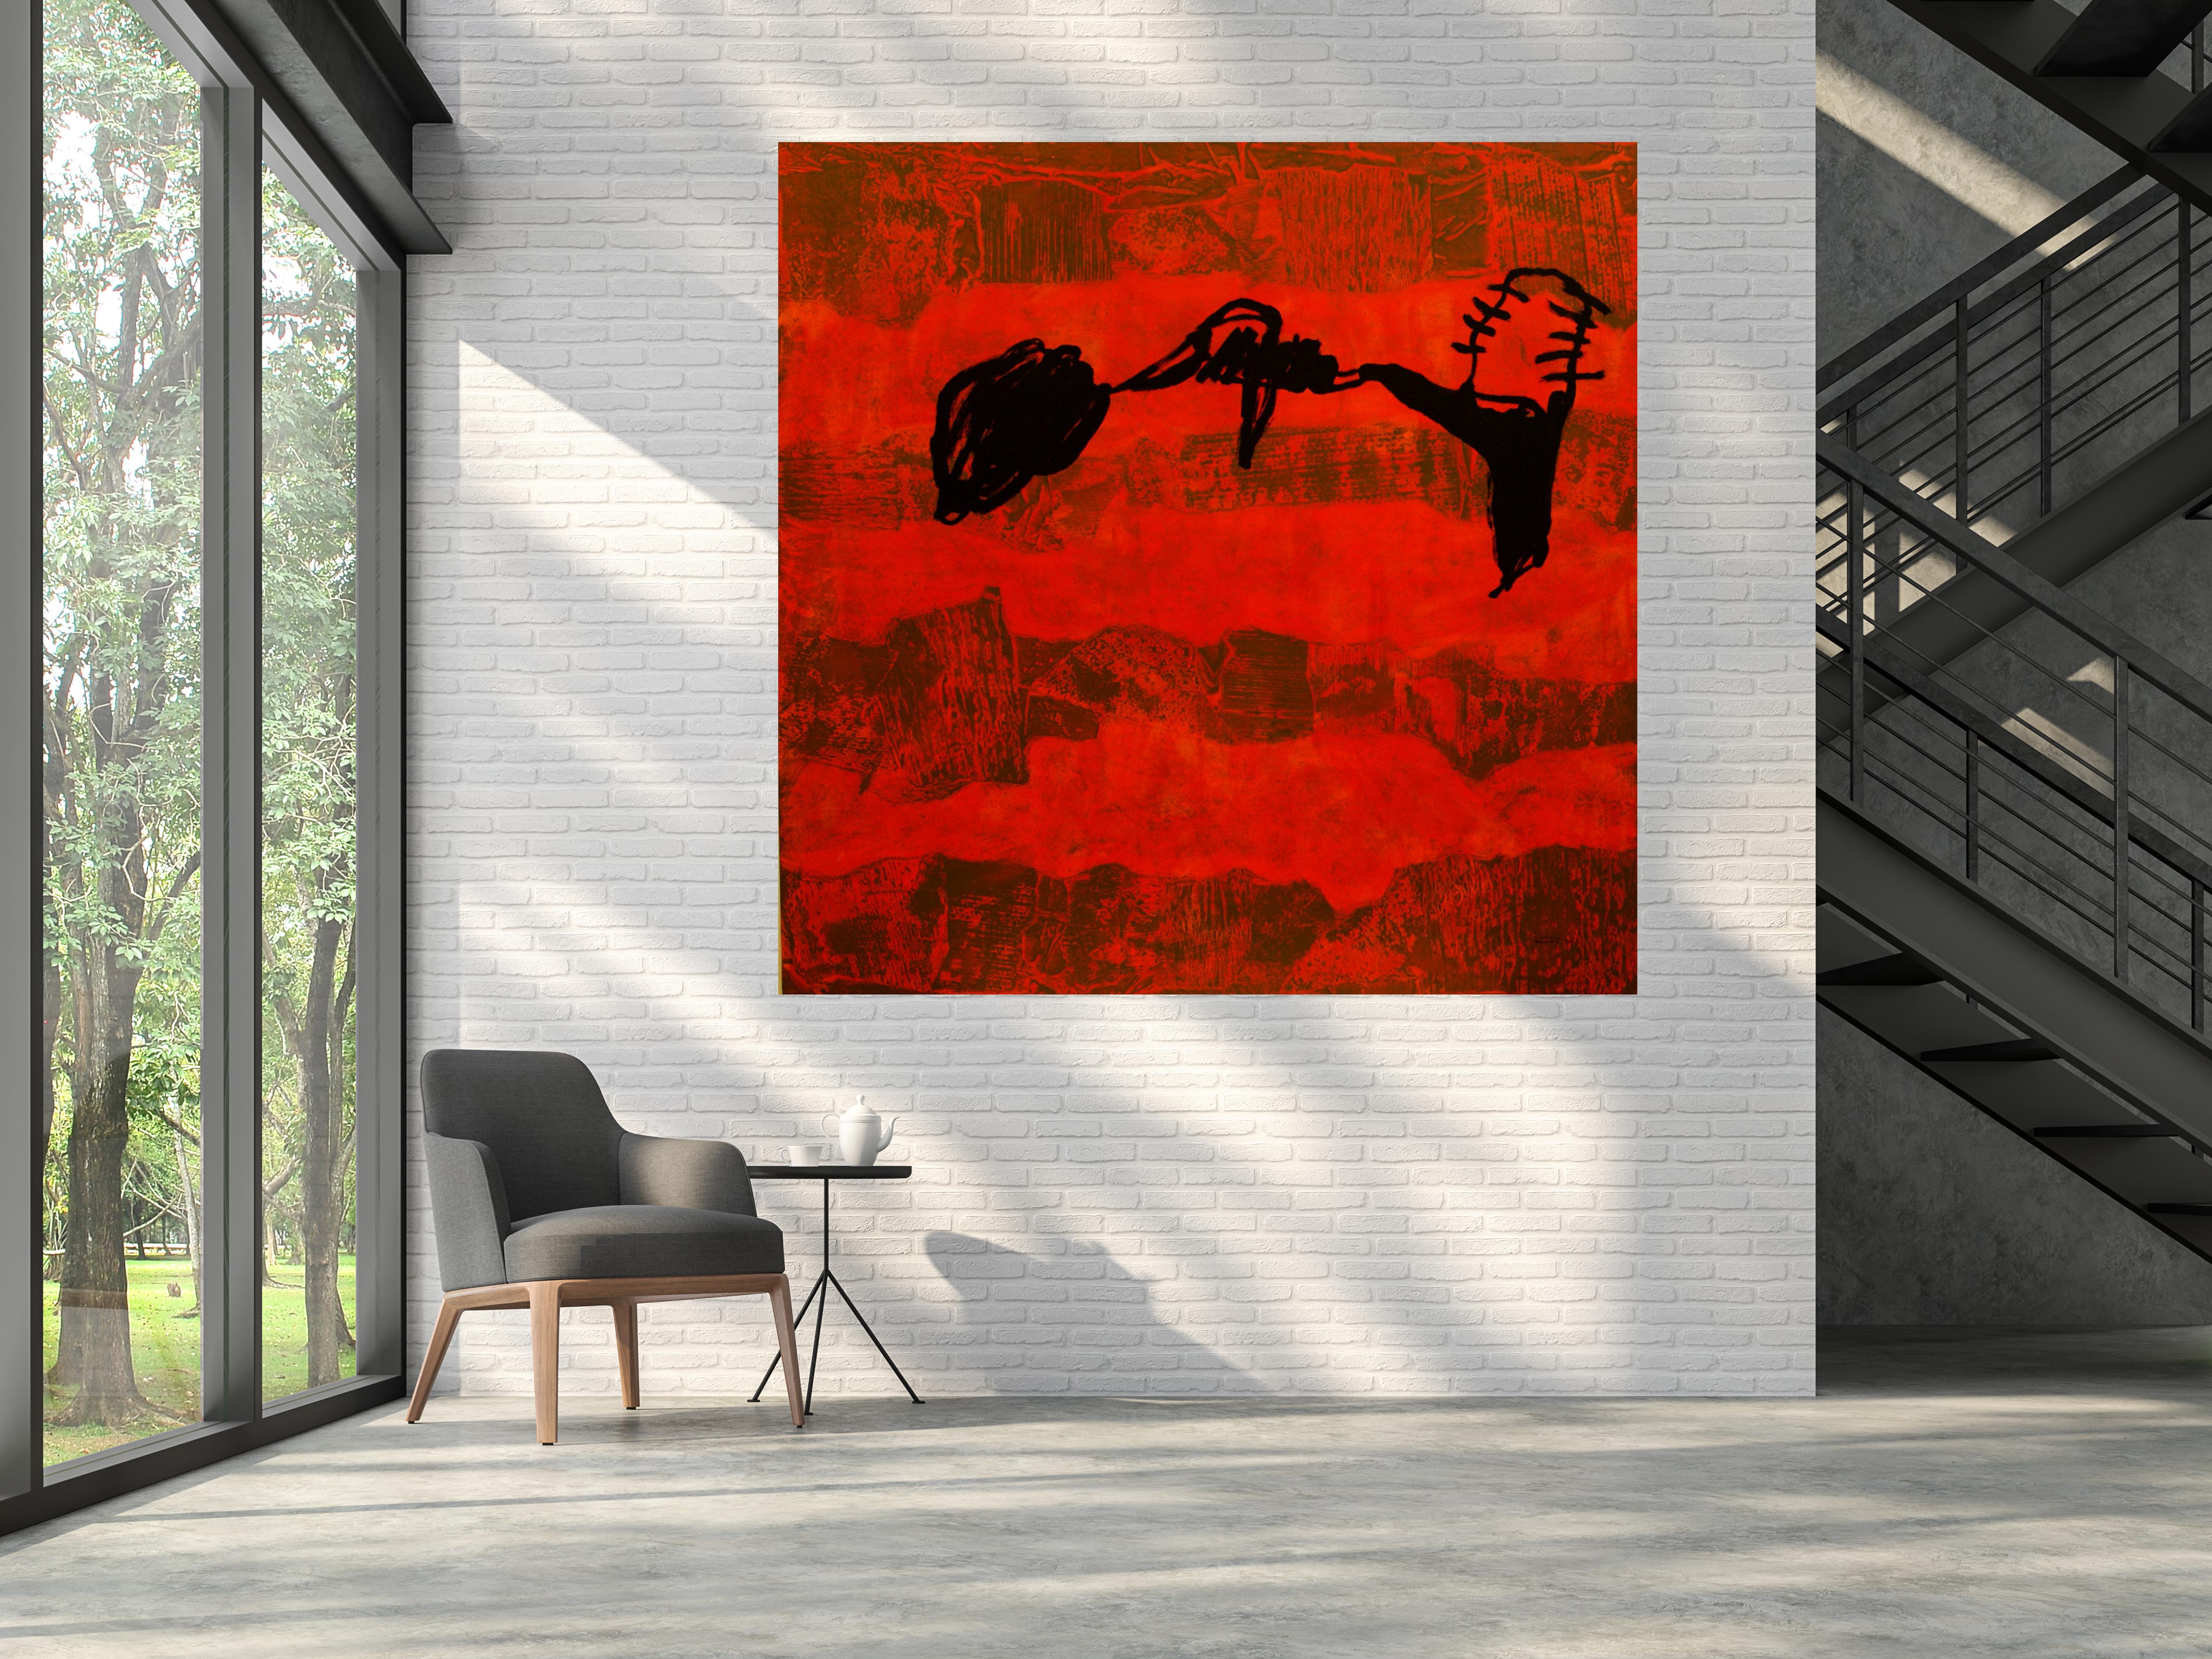 Ruz. astract. big . red .black. square original abstract acrylic painting
We offer the possibility of framing at no cost. we advise black or white
, Rafael Ruz.(Barcelona 1956)

While contemplating the painting of Ruz, we are inclined to talk about